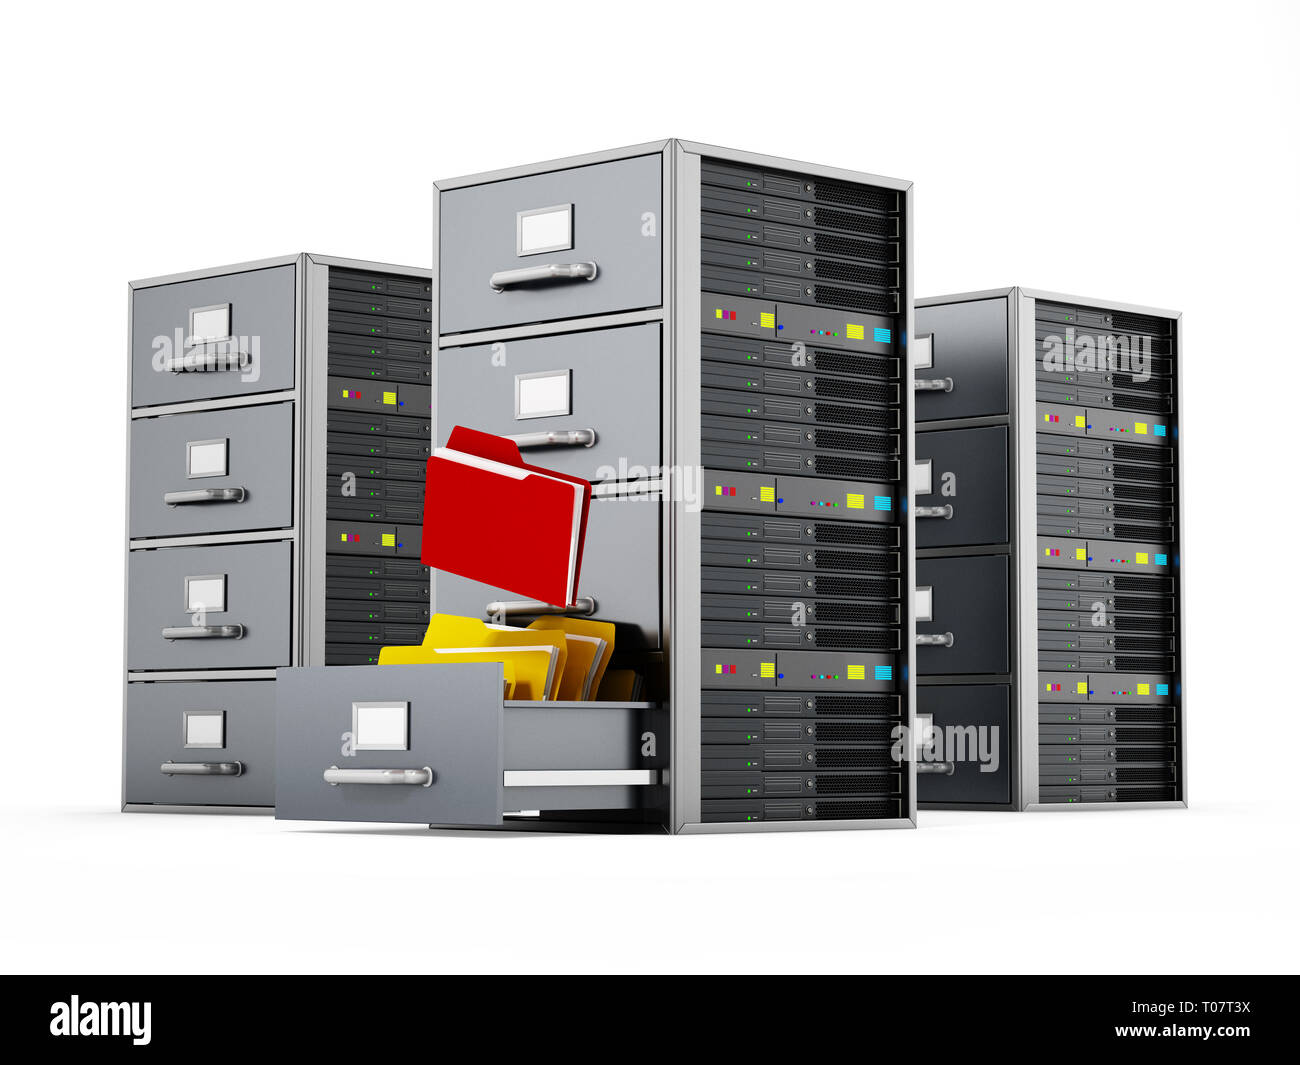 File cabinet combined with network server. 3D illustration. Stock Photo